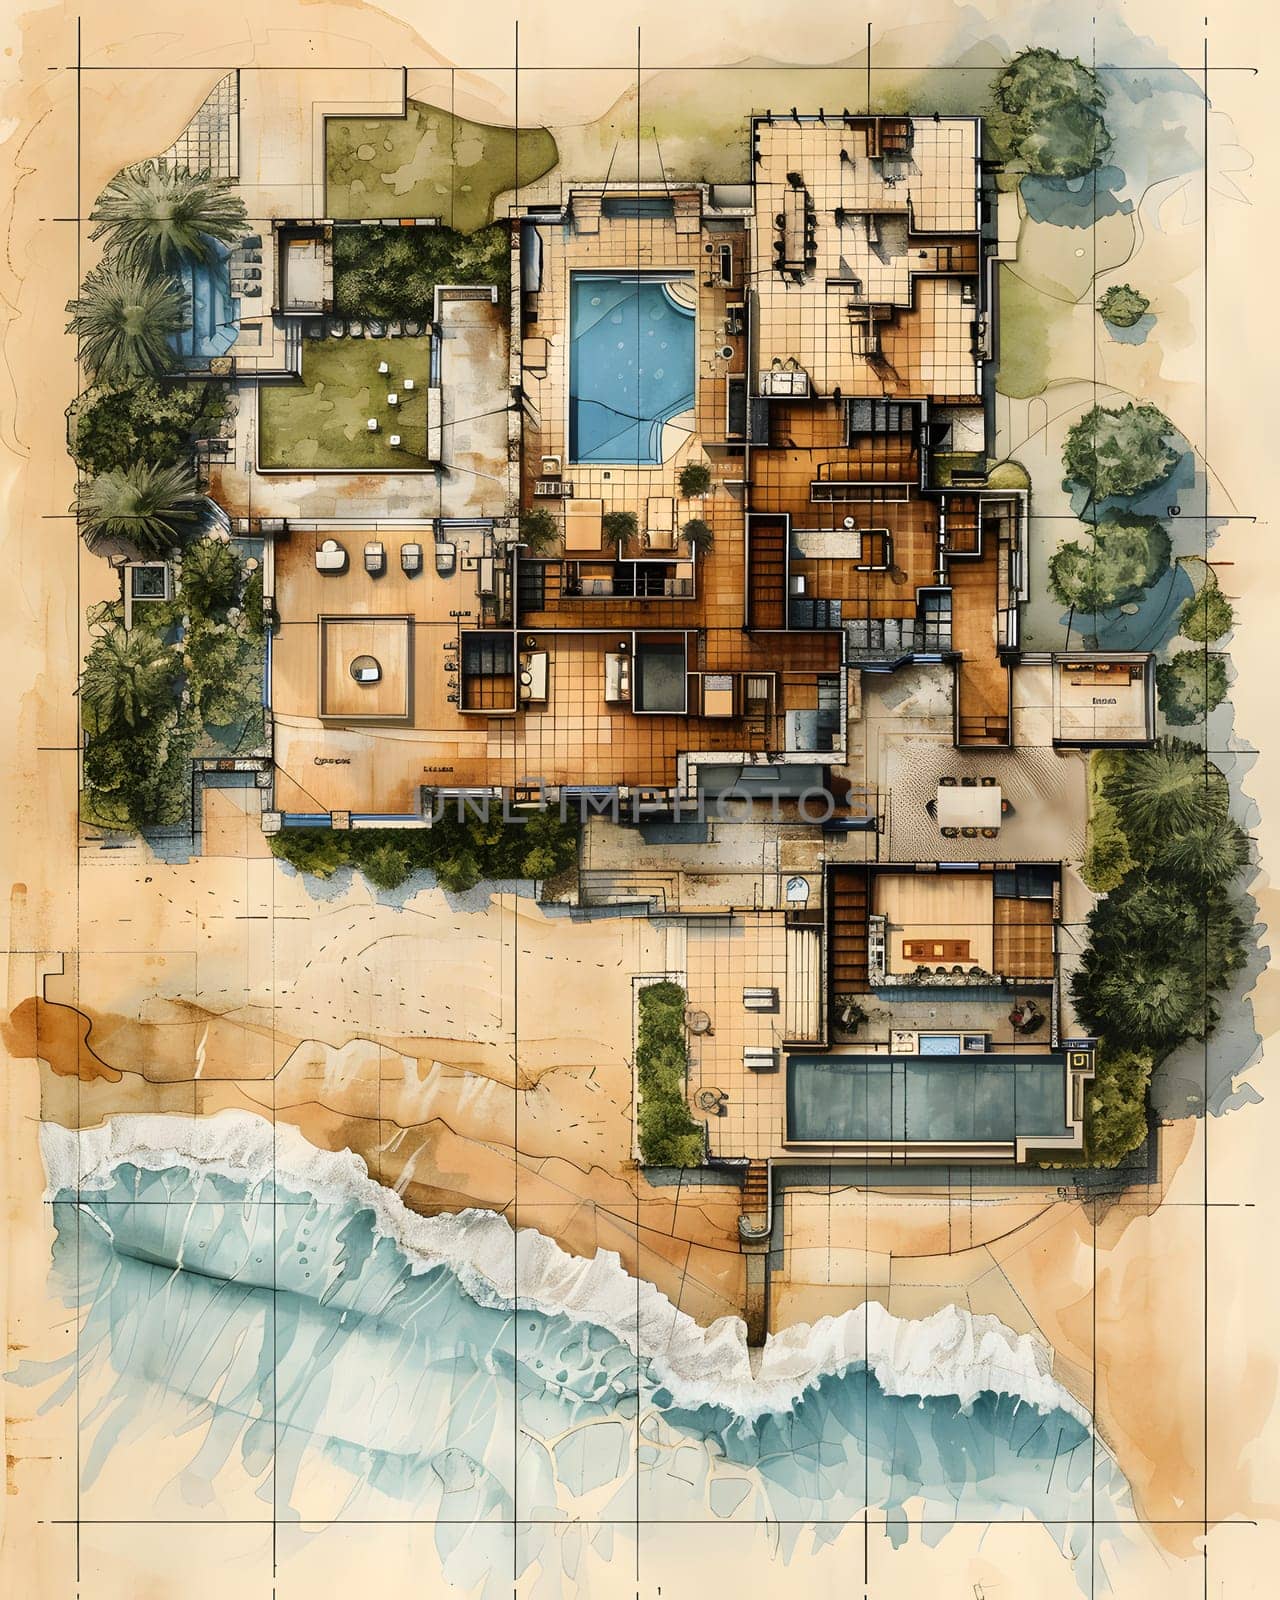 A beautiful painting of a rectangular beach house from an urban design perspective, capturing the landscape in a stunning visual arts illustration